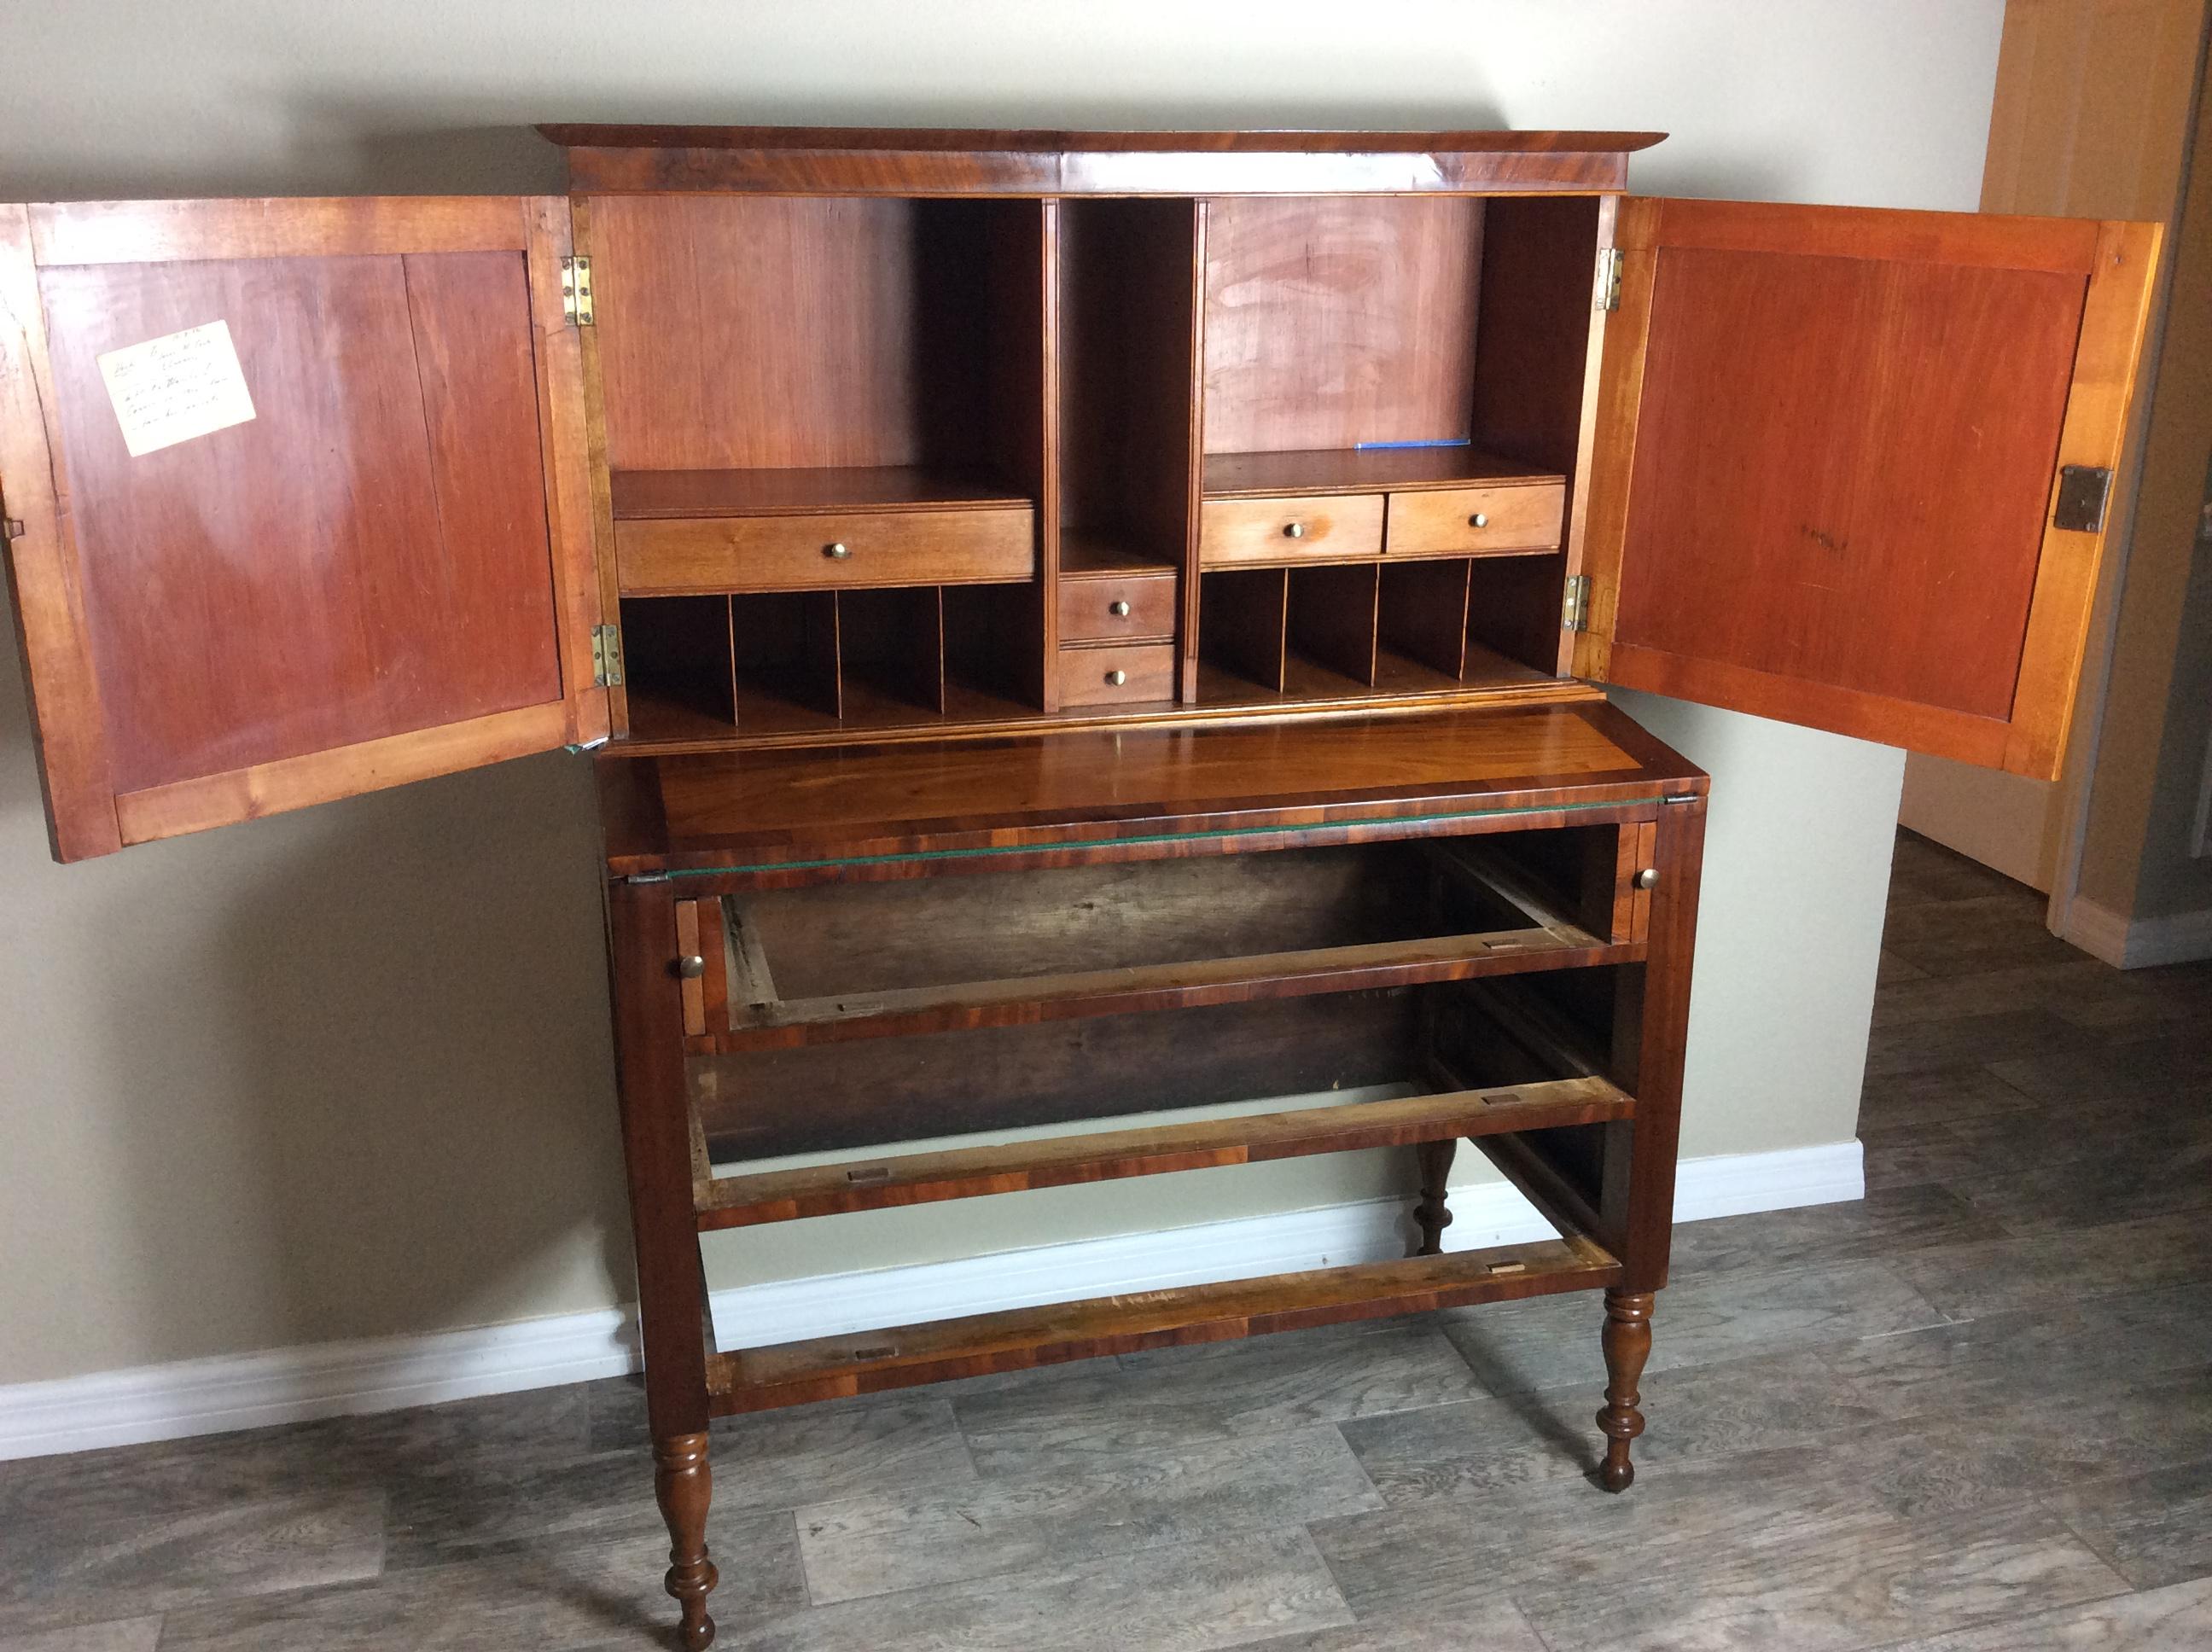 Sheraton  Birch, Cherry and figured Mahogany two piece American bookcase secretary most likely of New England origin possibly New Hampshire around 1830-40.  Very good overall condition retaining an older refinish exhibiting a nice warm aged color